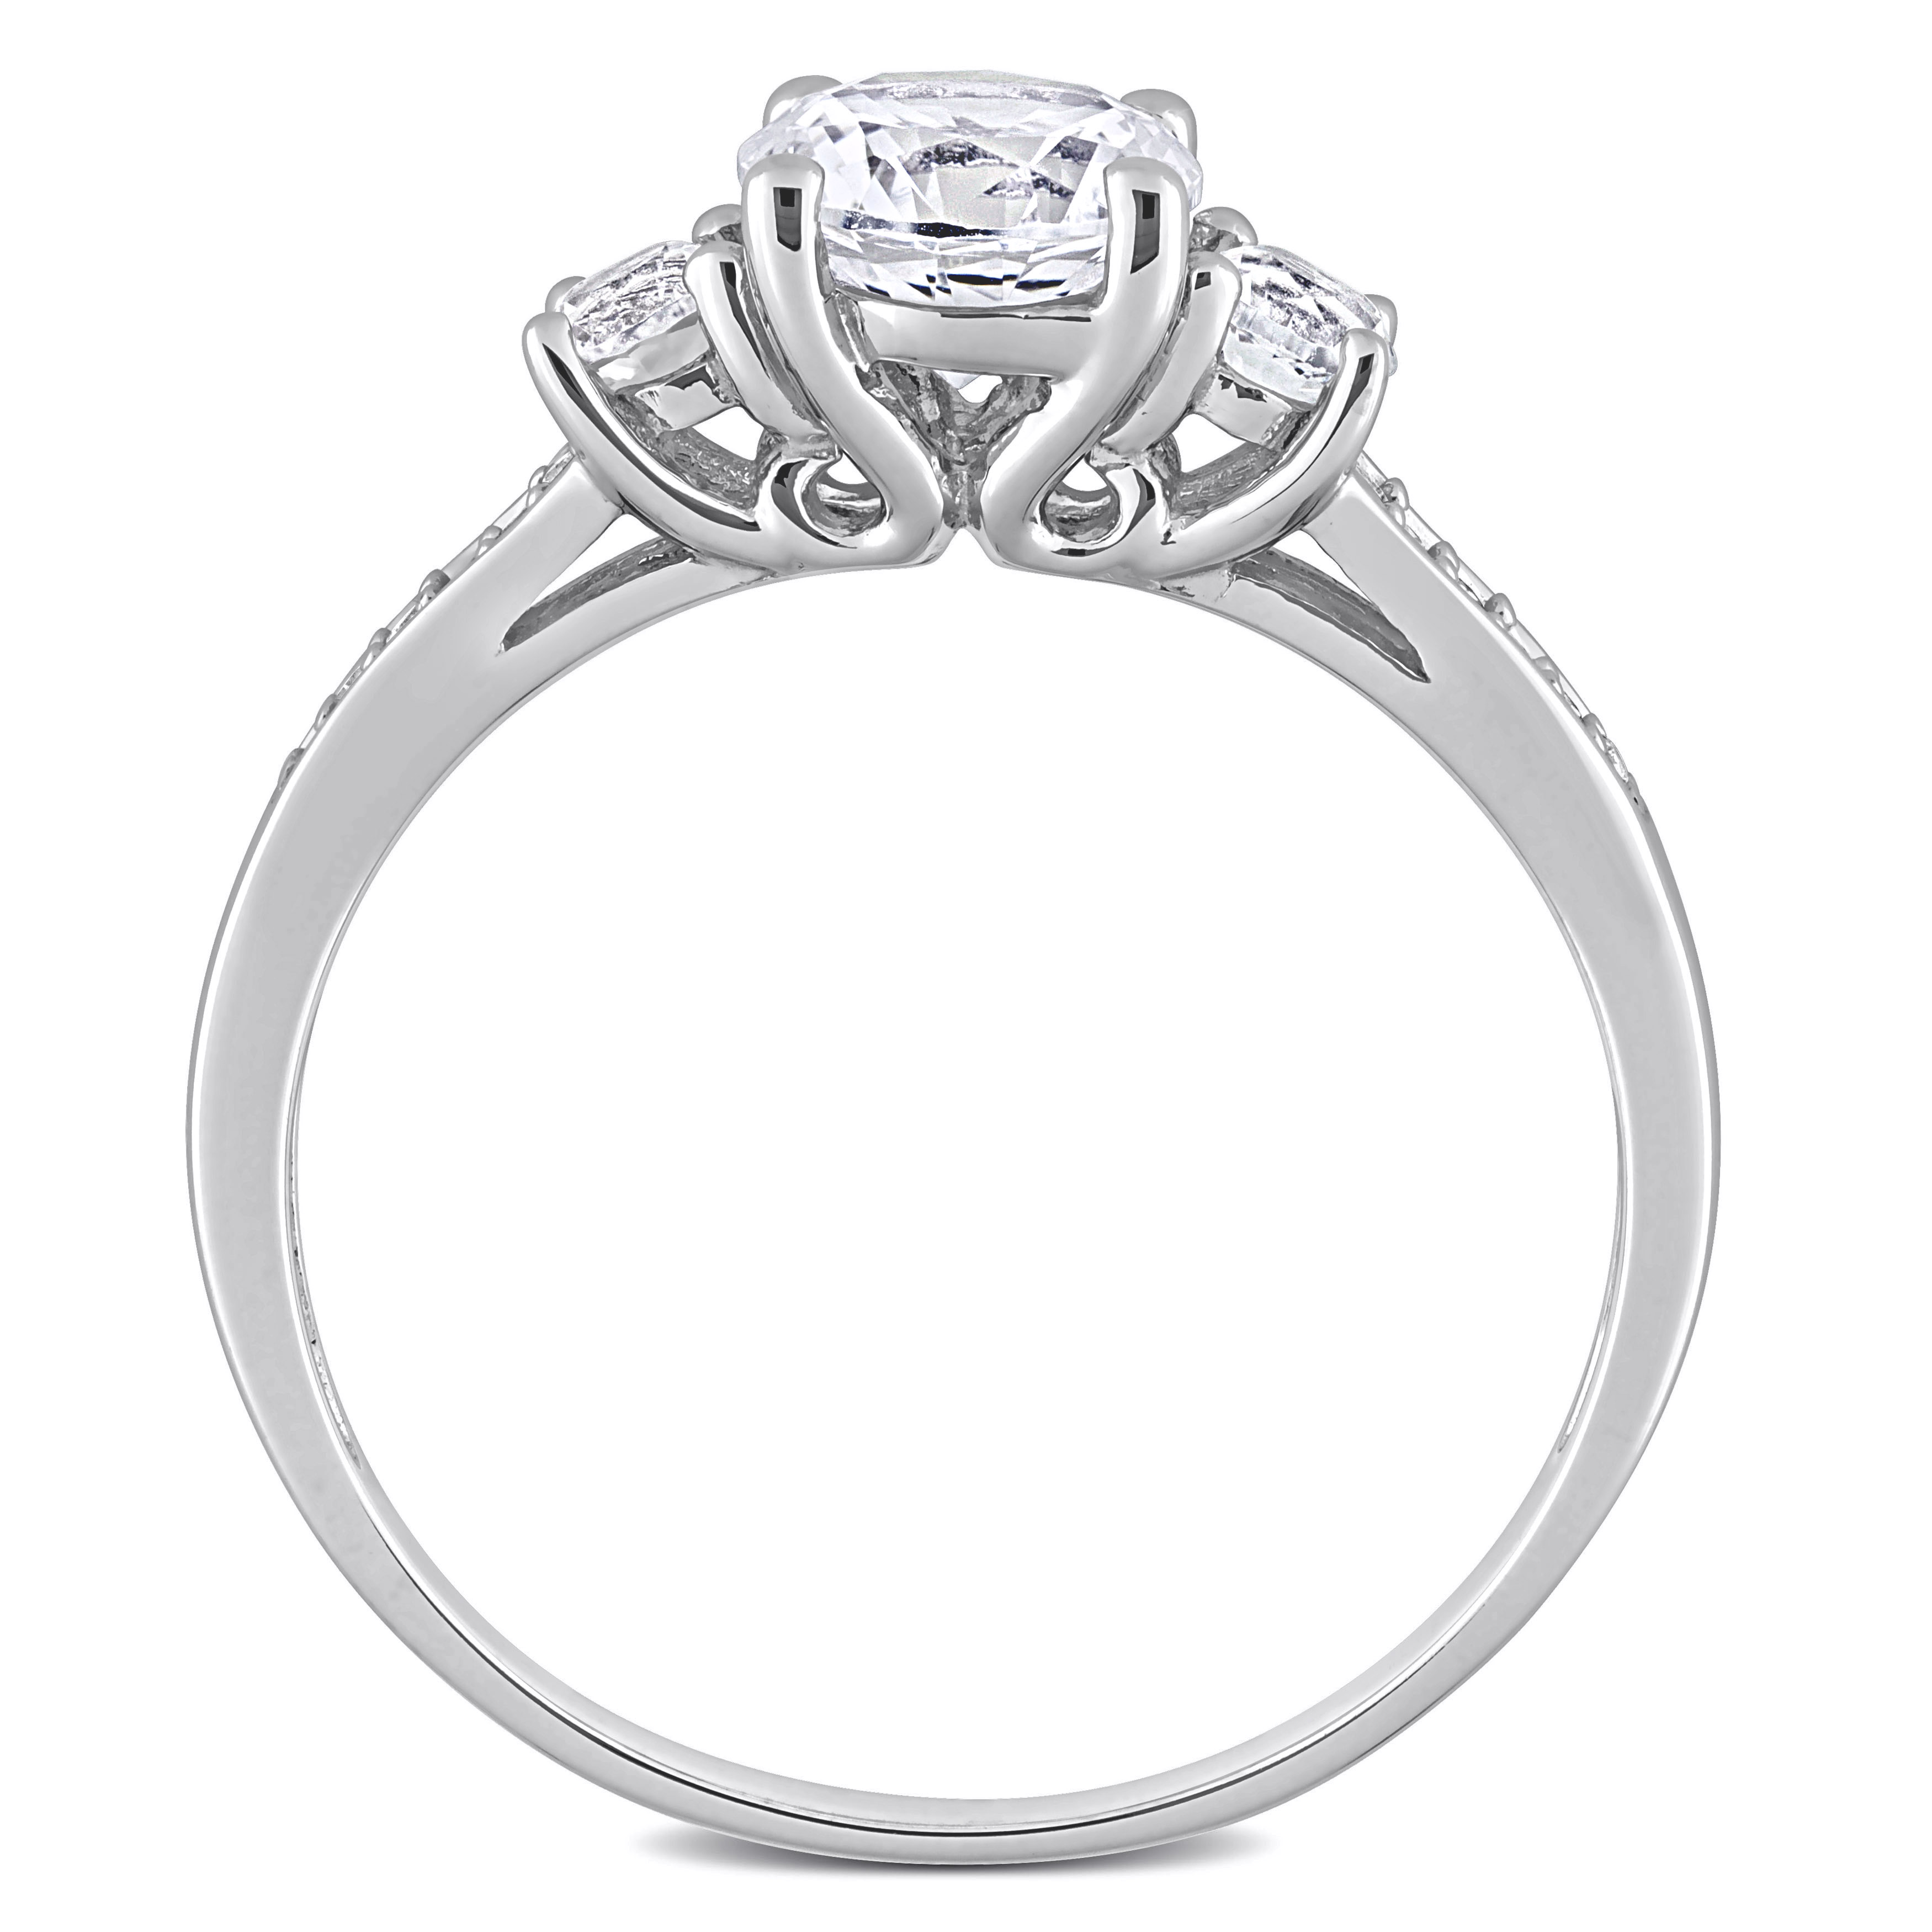 Everly Women's Engagement Anniversary Bridal 1 1/3 CT. Round Created White Sapphire Round-Cut Diamond Accent (G-H, I2-I3) 10kt White Gold 3-Stone Ring with 4 Prong/Pave Setting & Shoulder Diamonds - image 6 of 10